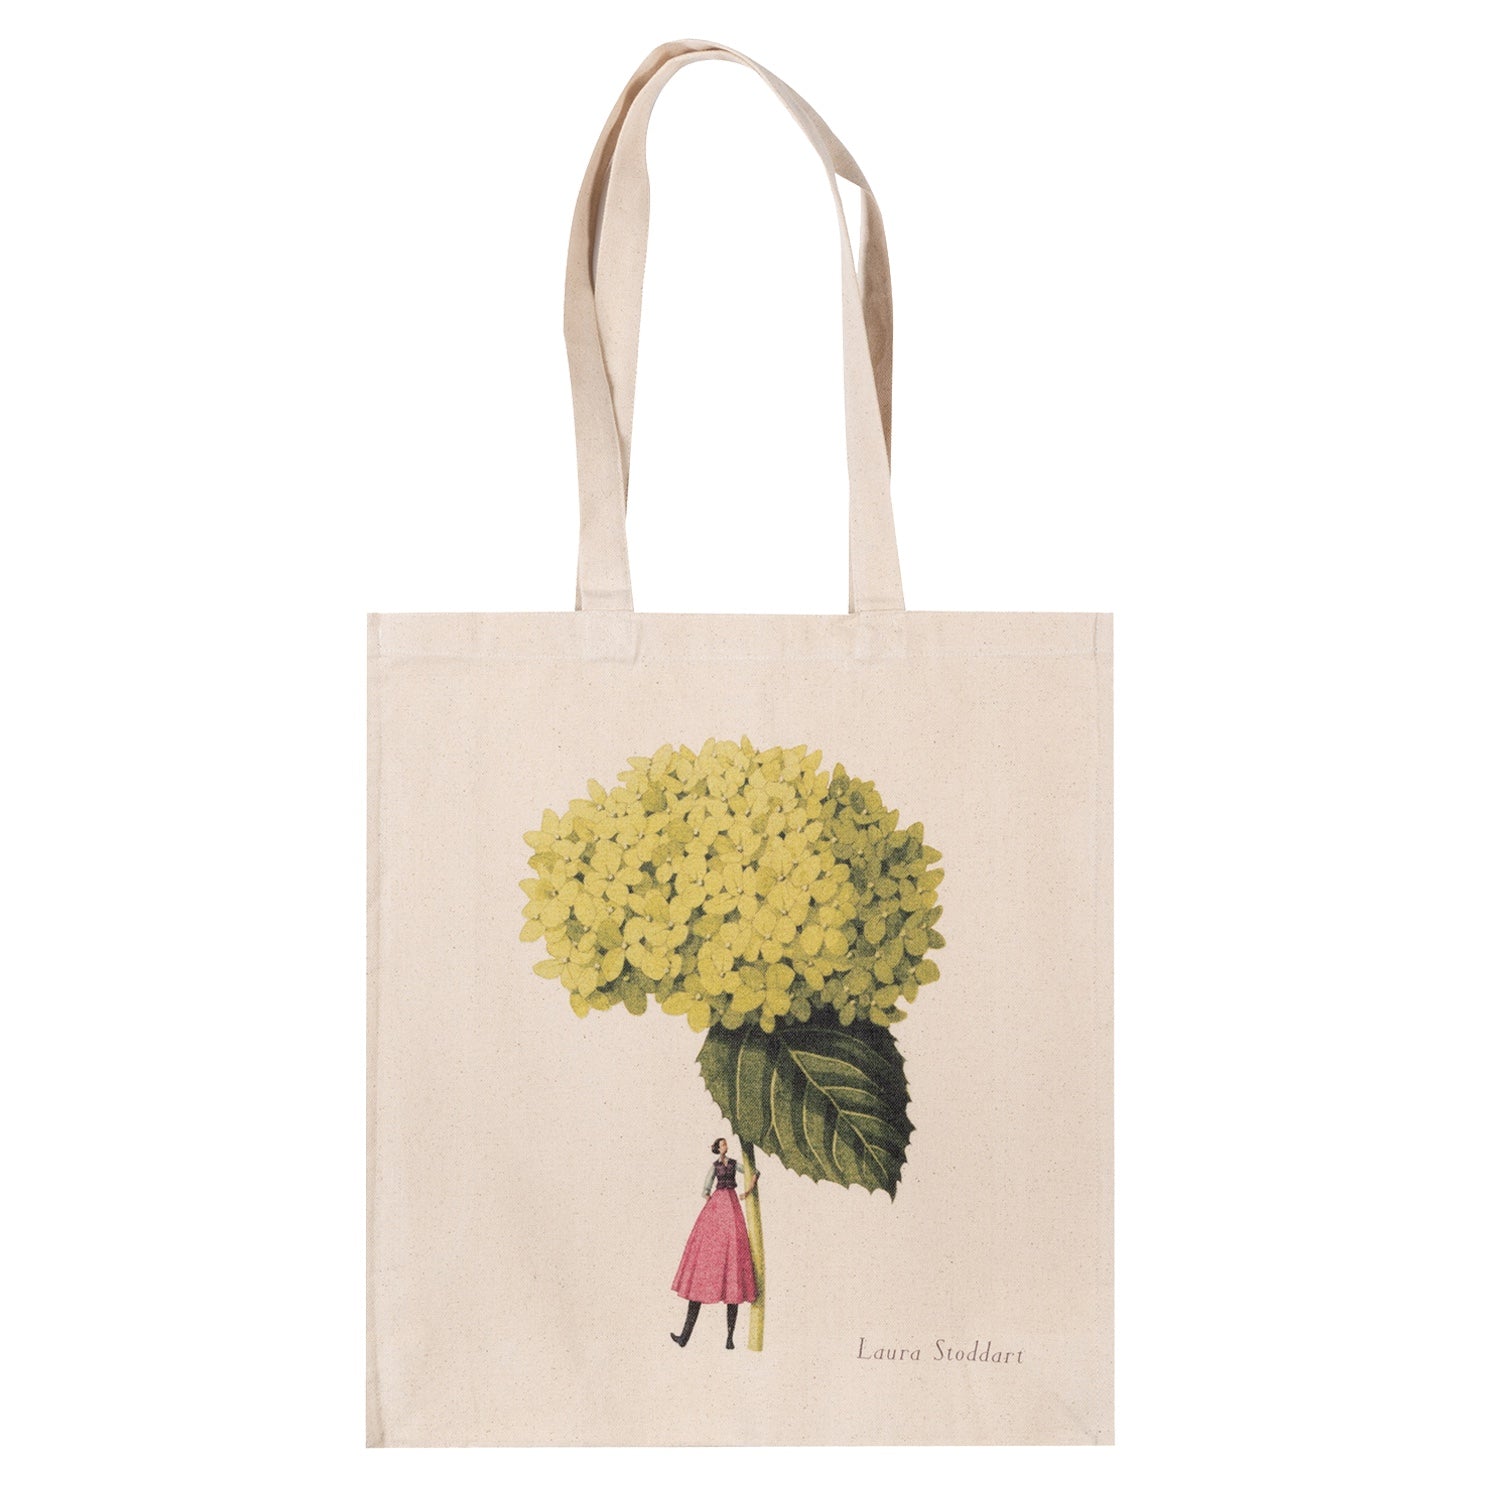 The Annabelle Heavyweight Canvas Tote Bag is light tan featuring a stylized illustration of a woman holding a gigantic green hydrangea bloom by the stem.